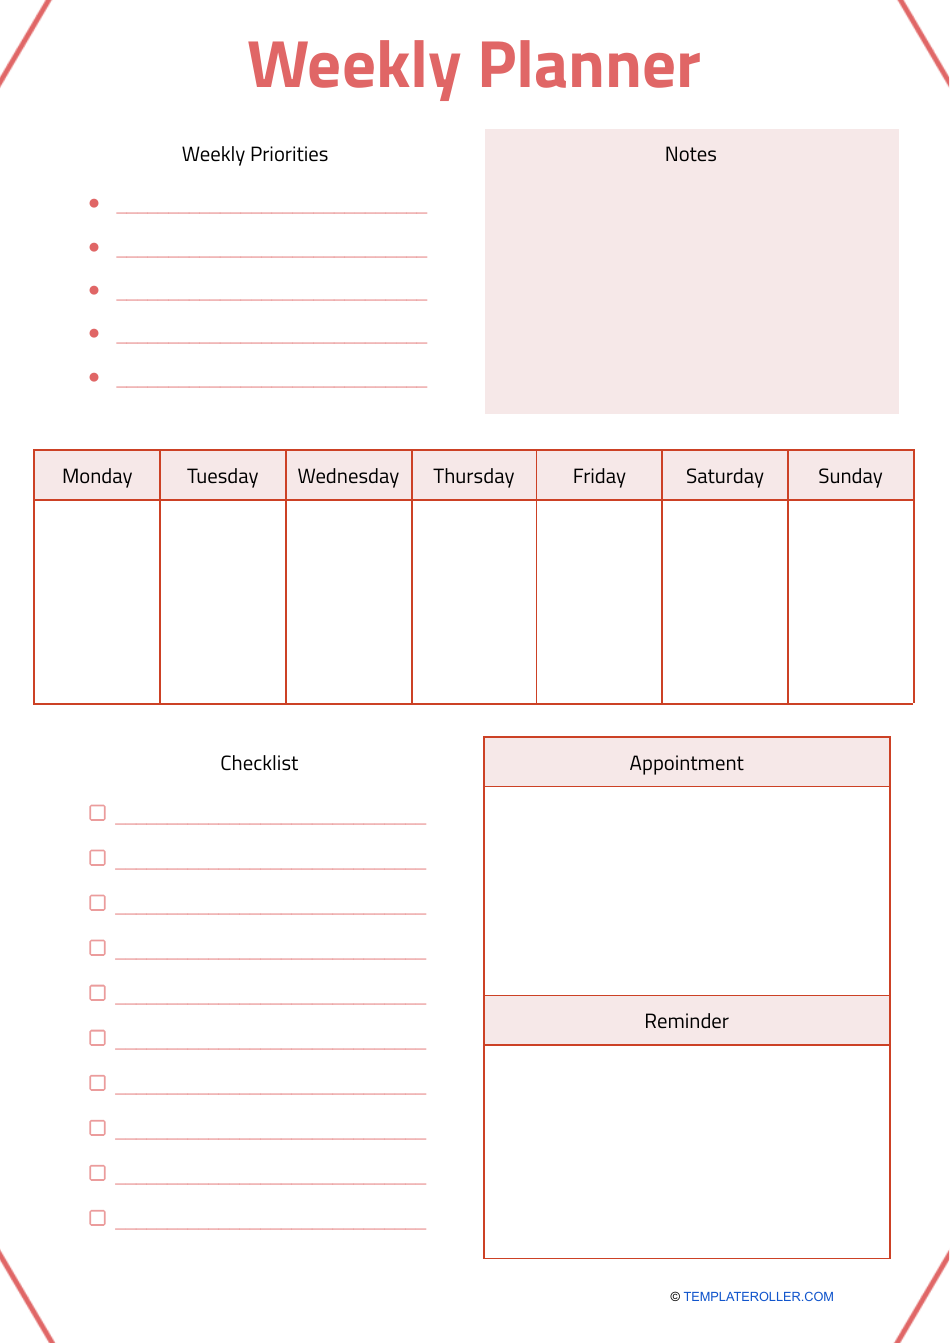 Weekly Planner Template - Sample Design Preview